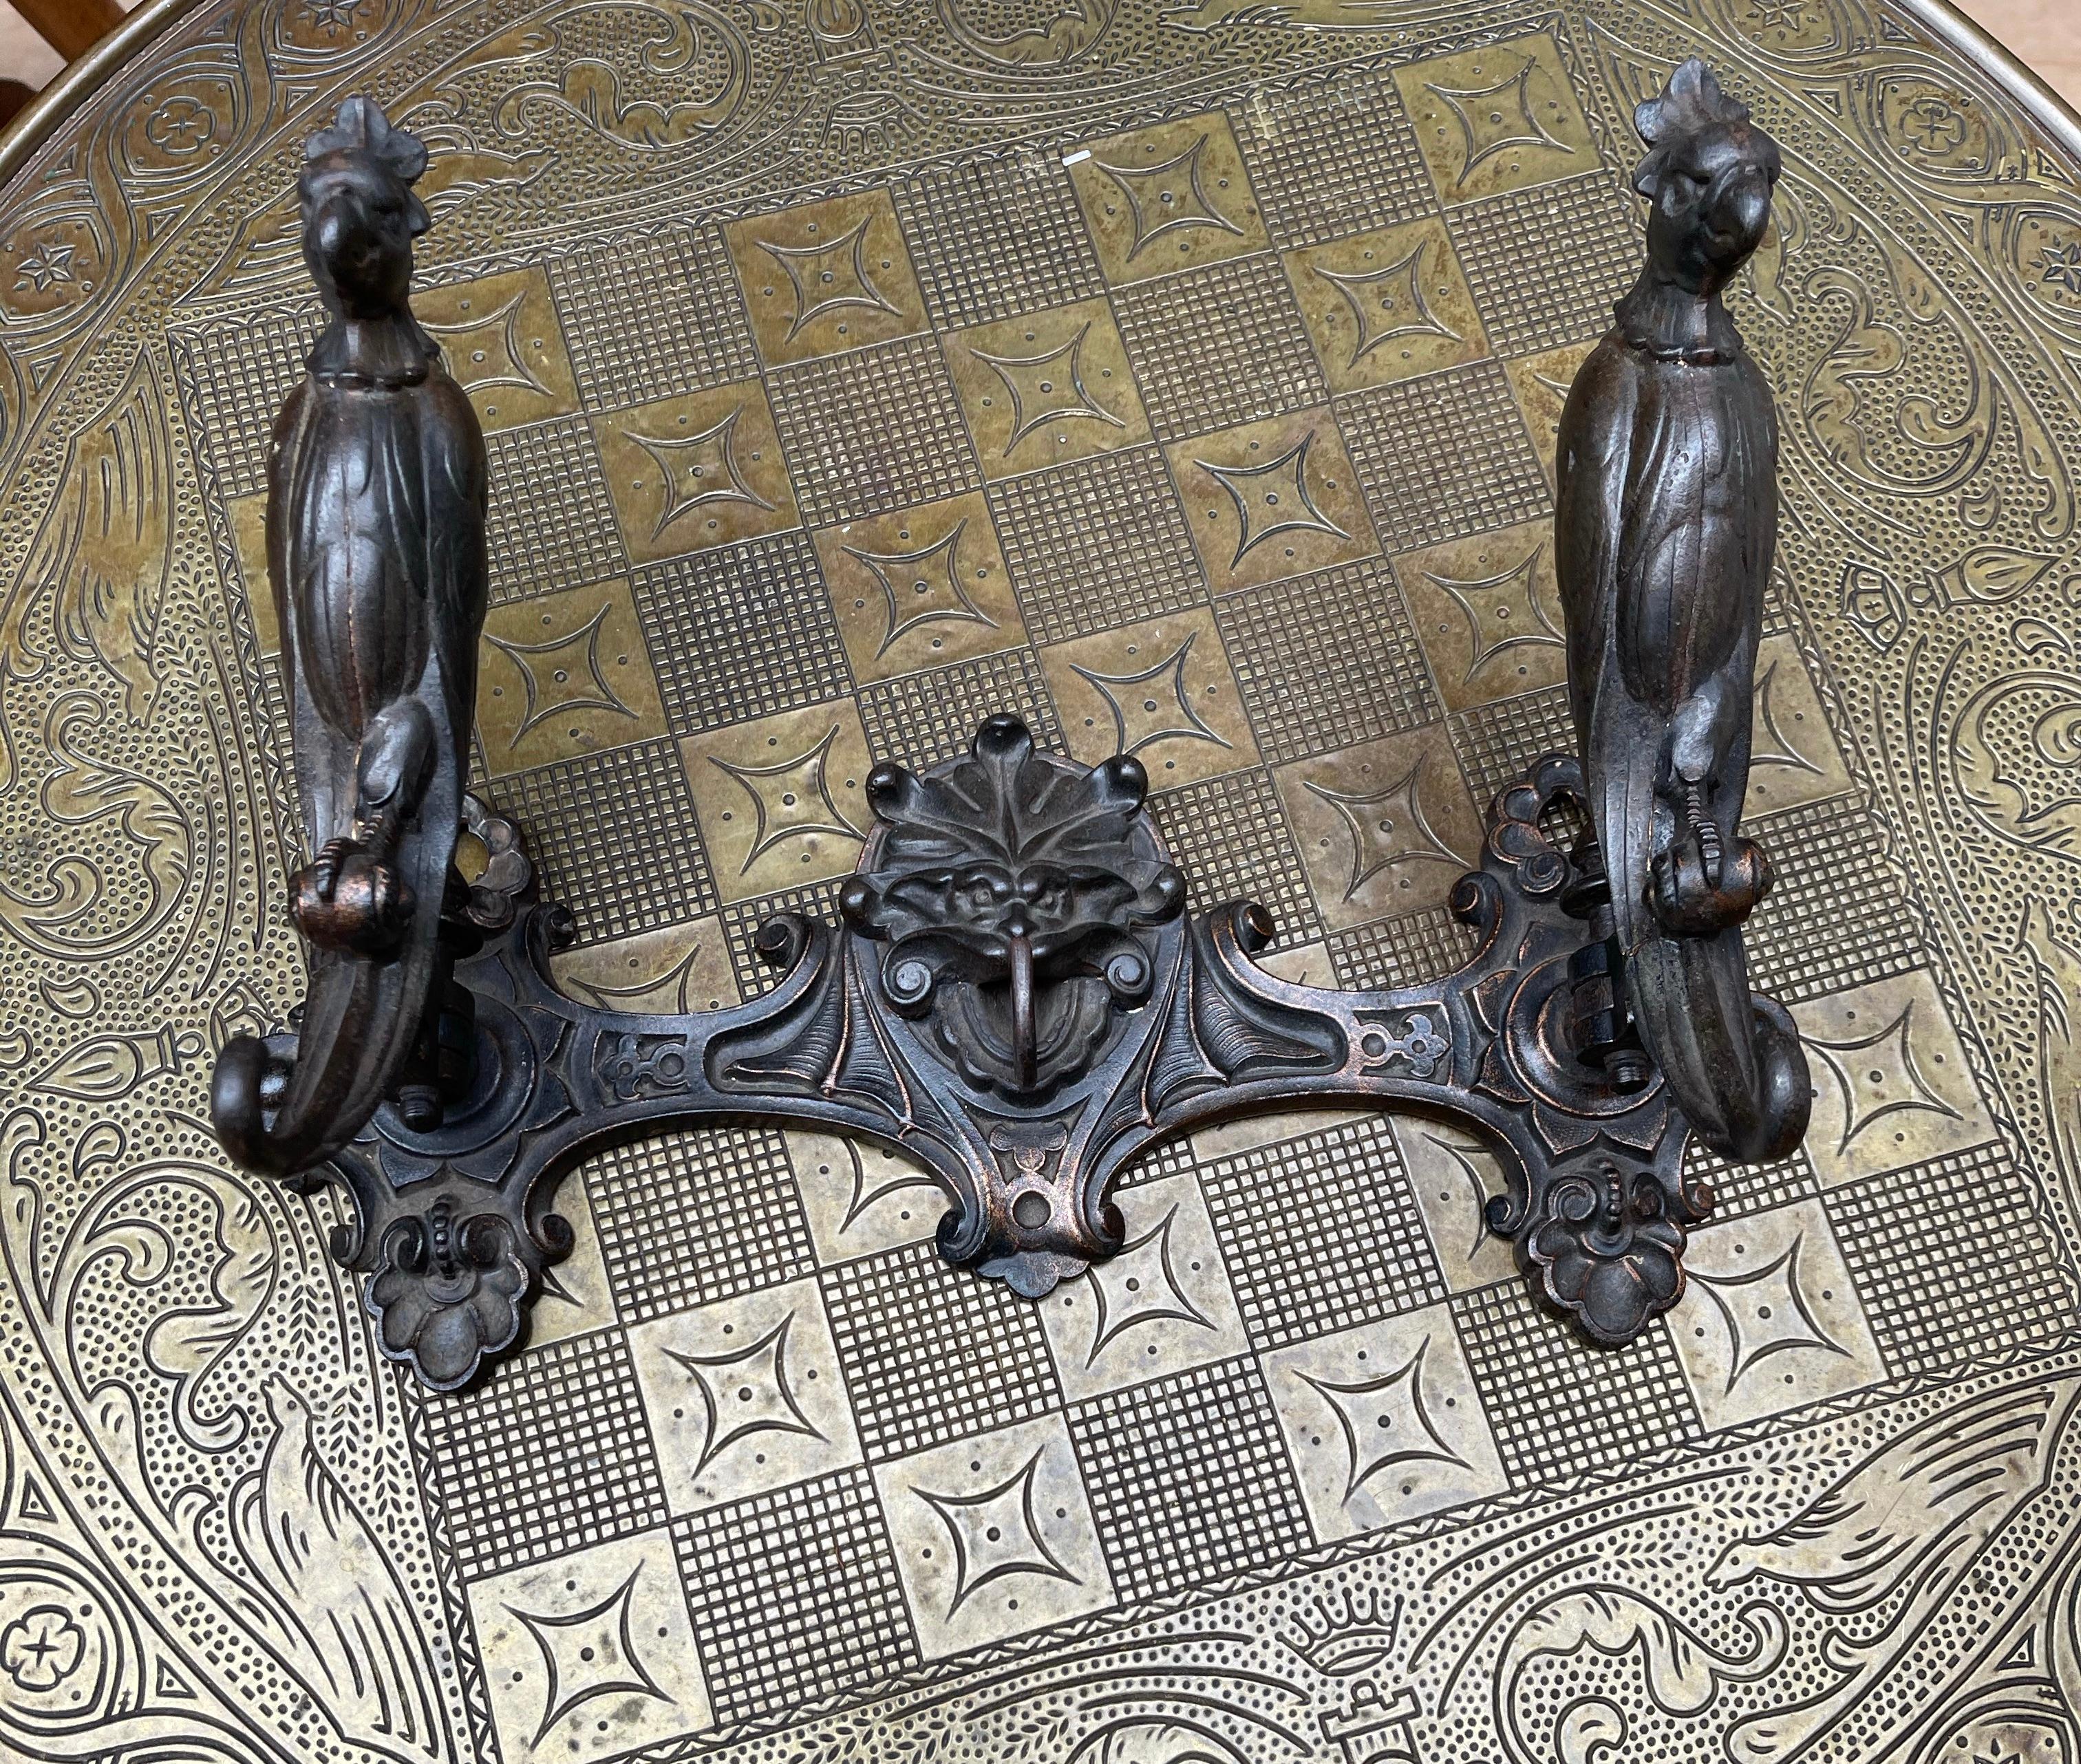 Antique Bronzed Iron Wall Key or Coat Rack with Movable Parrot Sculpture Hooks 7